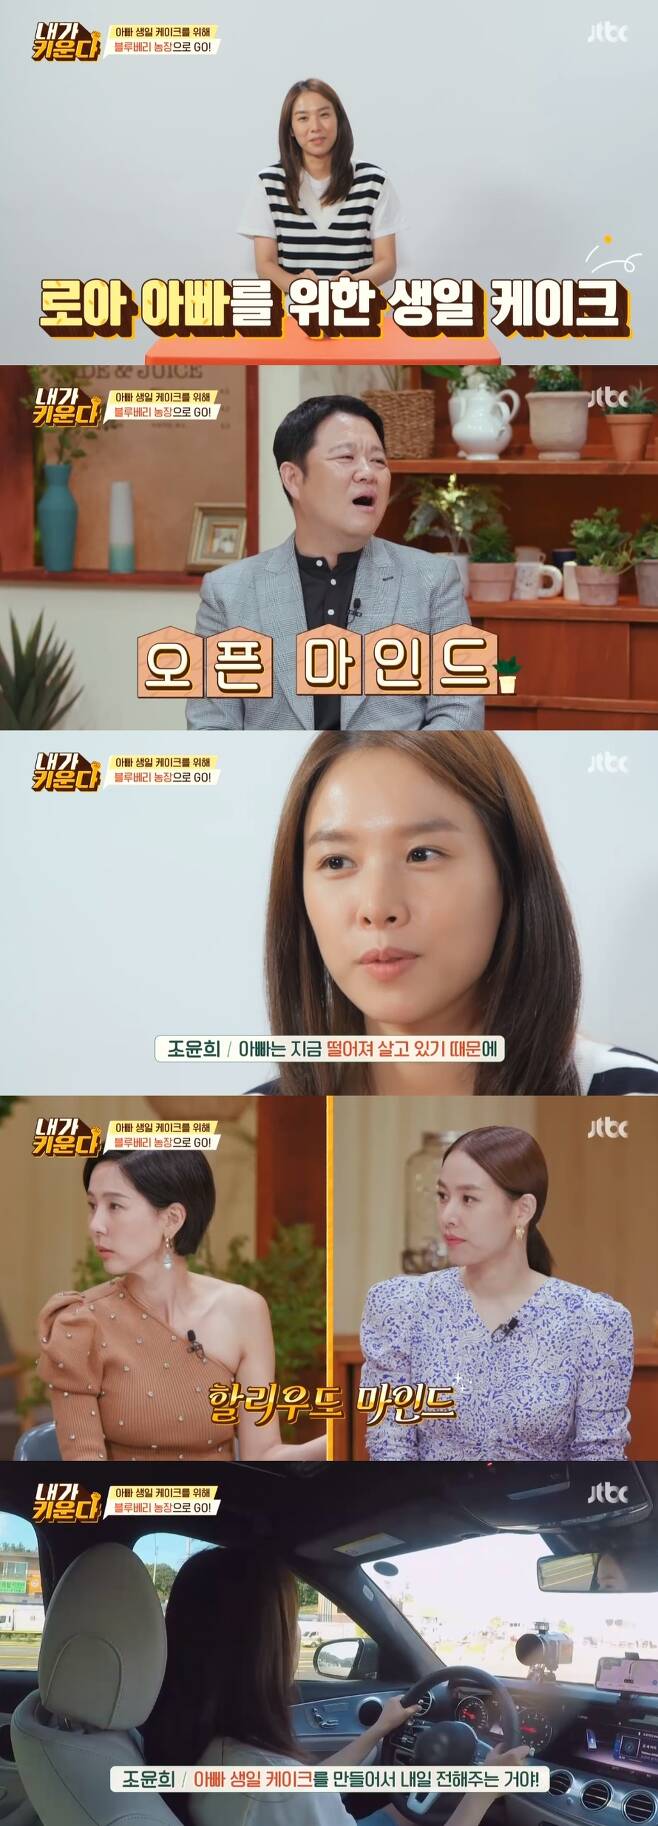 Seoul = = Actor Jo Yoon-hee has taken care of the birthday of former Husband Lee Dong-gun.Jo Yoon-hee went to Blueberry Farm with his daughter Roar, who was alone in the JTBC entertainment program Brave Solo Childing - I Raise broadcasted on the afternoon of the 27th.Jo Yoon-hee said, I wanted to make a birthday cake with blueberries, because I remembered my forgotten Roar Father birthday. In fact, my family is good at family birthdays.Father thinks that he should take better care of himself because he lives apart. Jo Yoon-hee added: I think Roar Father will be very pleased and I thought it would be a good memory for Roar, so I decided to make Fathers birthday Cake.With the cast watching the video surprised, Kim Na-young said, Its like watching Hollywood, its not going to be easy to get close.Chae Rim also said of Jo Yoon-hee, I always thought I would have had a conservative thinking by acting as FM, but I am like a person who is ahead of anyone.Jo Yoon-hee told Roar, Lets make a cake today because its the day to meet Father tomorrow, and Roar was excited.